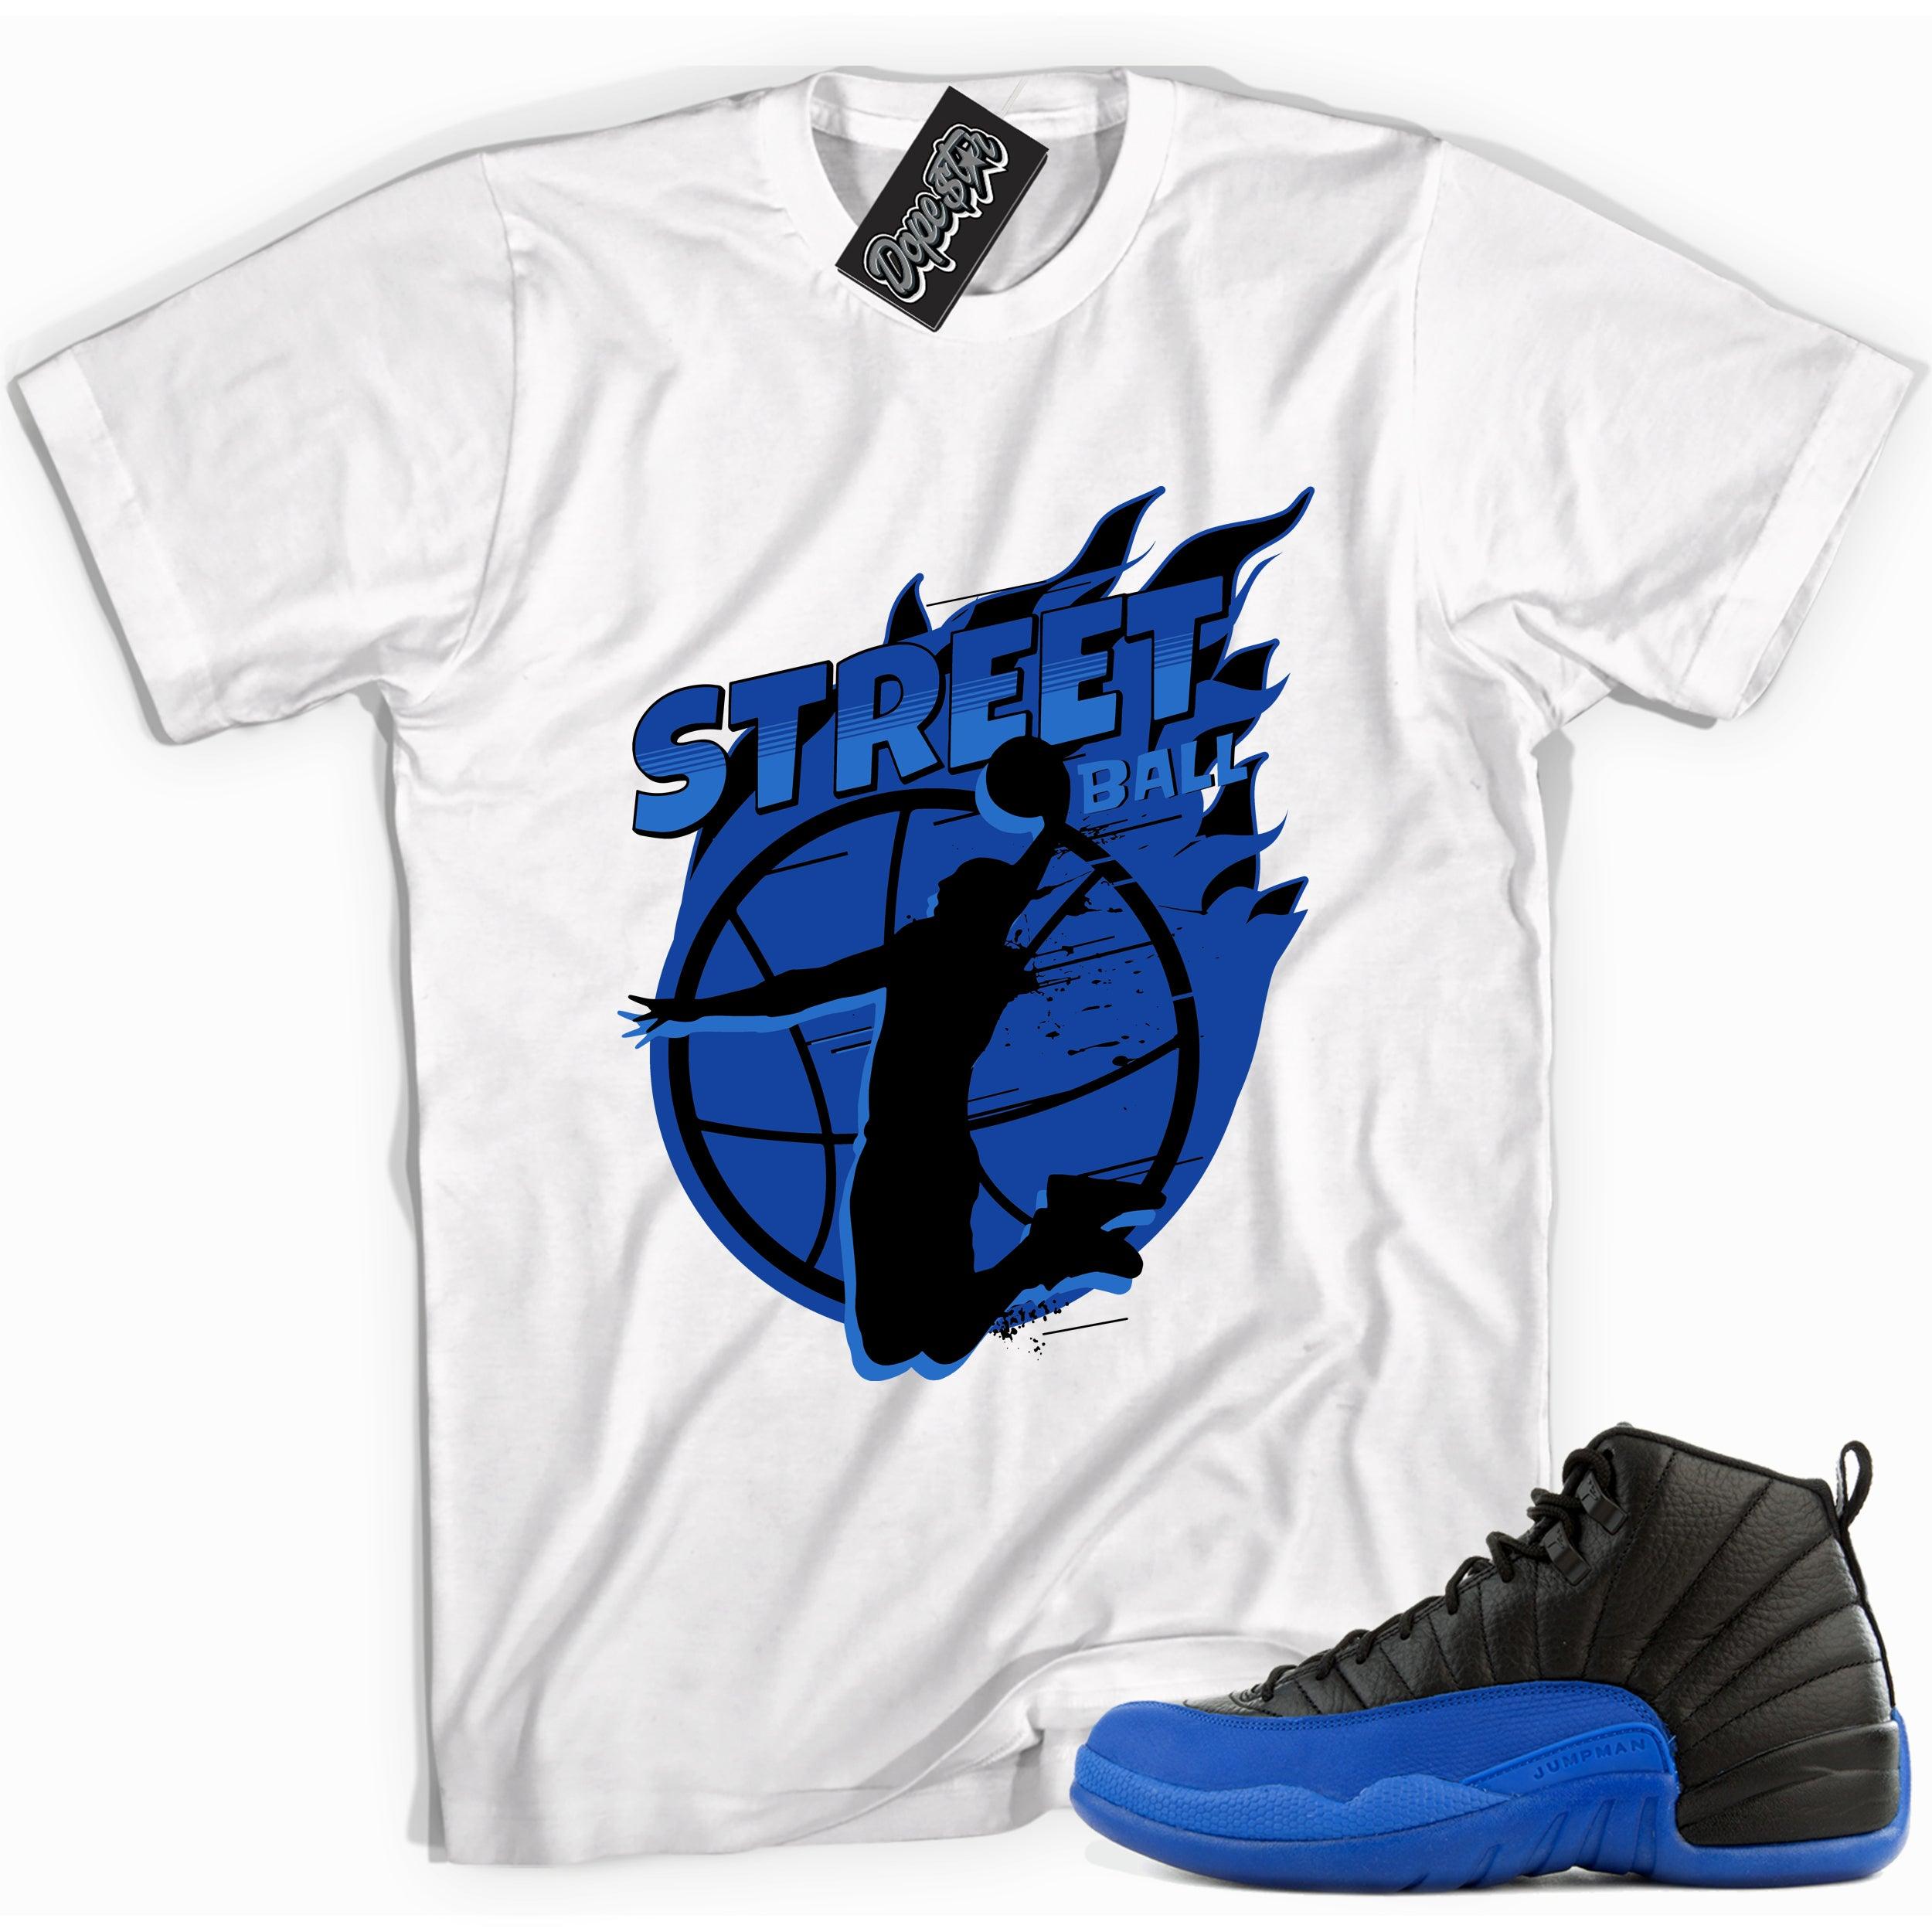 Cool white graphic tee with 'street ball' print, that perfectly matches Air Jordan 12 Retro Black Game Royal sneakers.